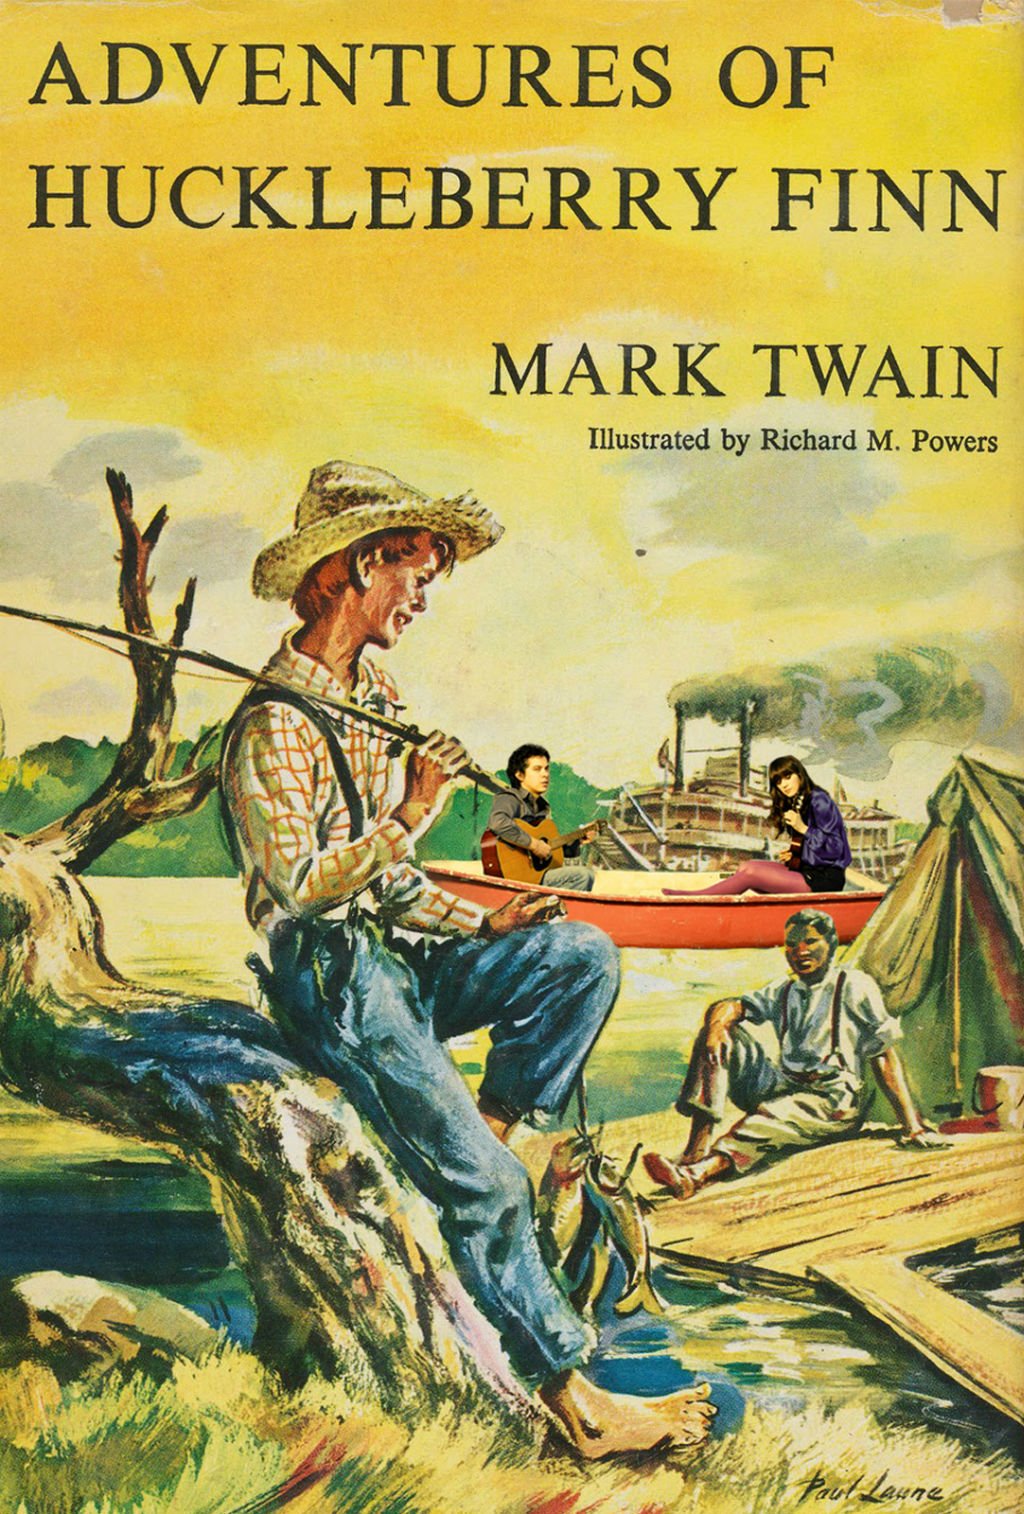 The Adventures of Huckleberry Finn, by Mark Twain - book that everyone should read